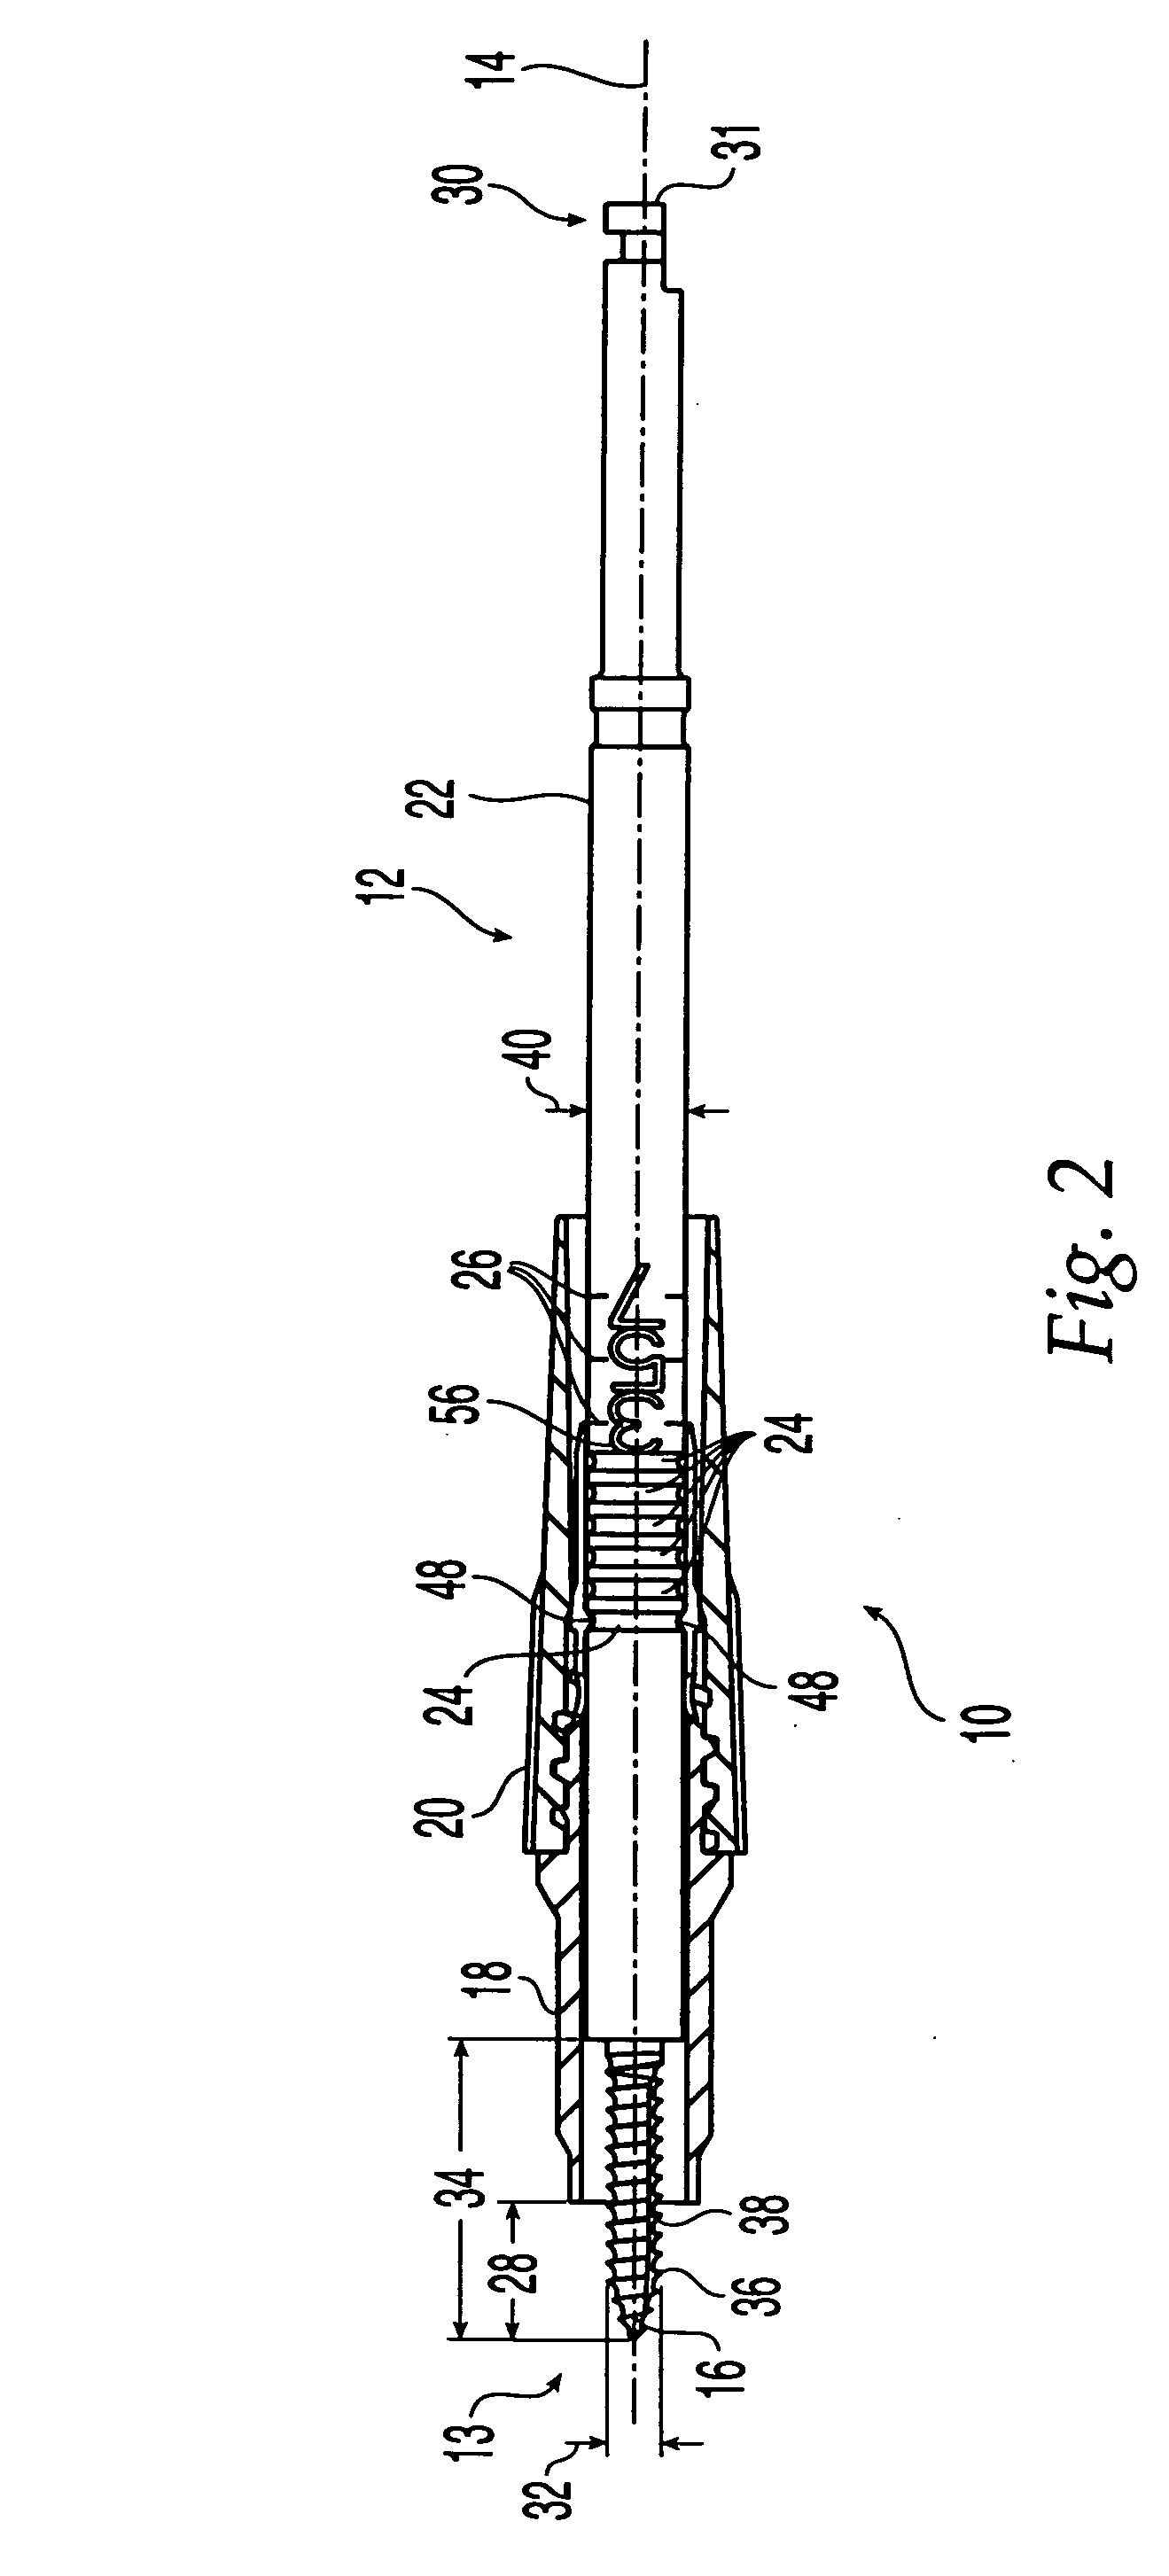 Adjustable length tap and method for drilling and tapping a bore in bone